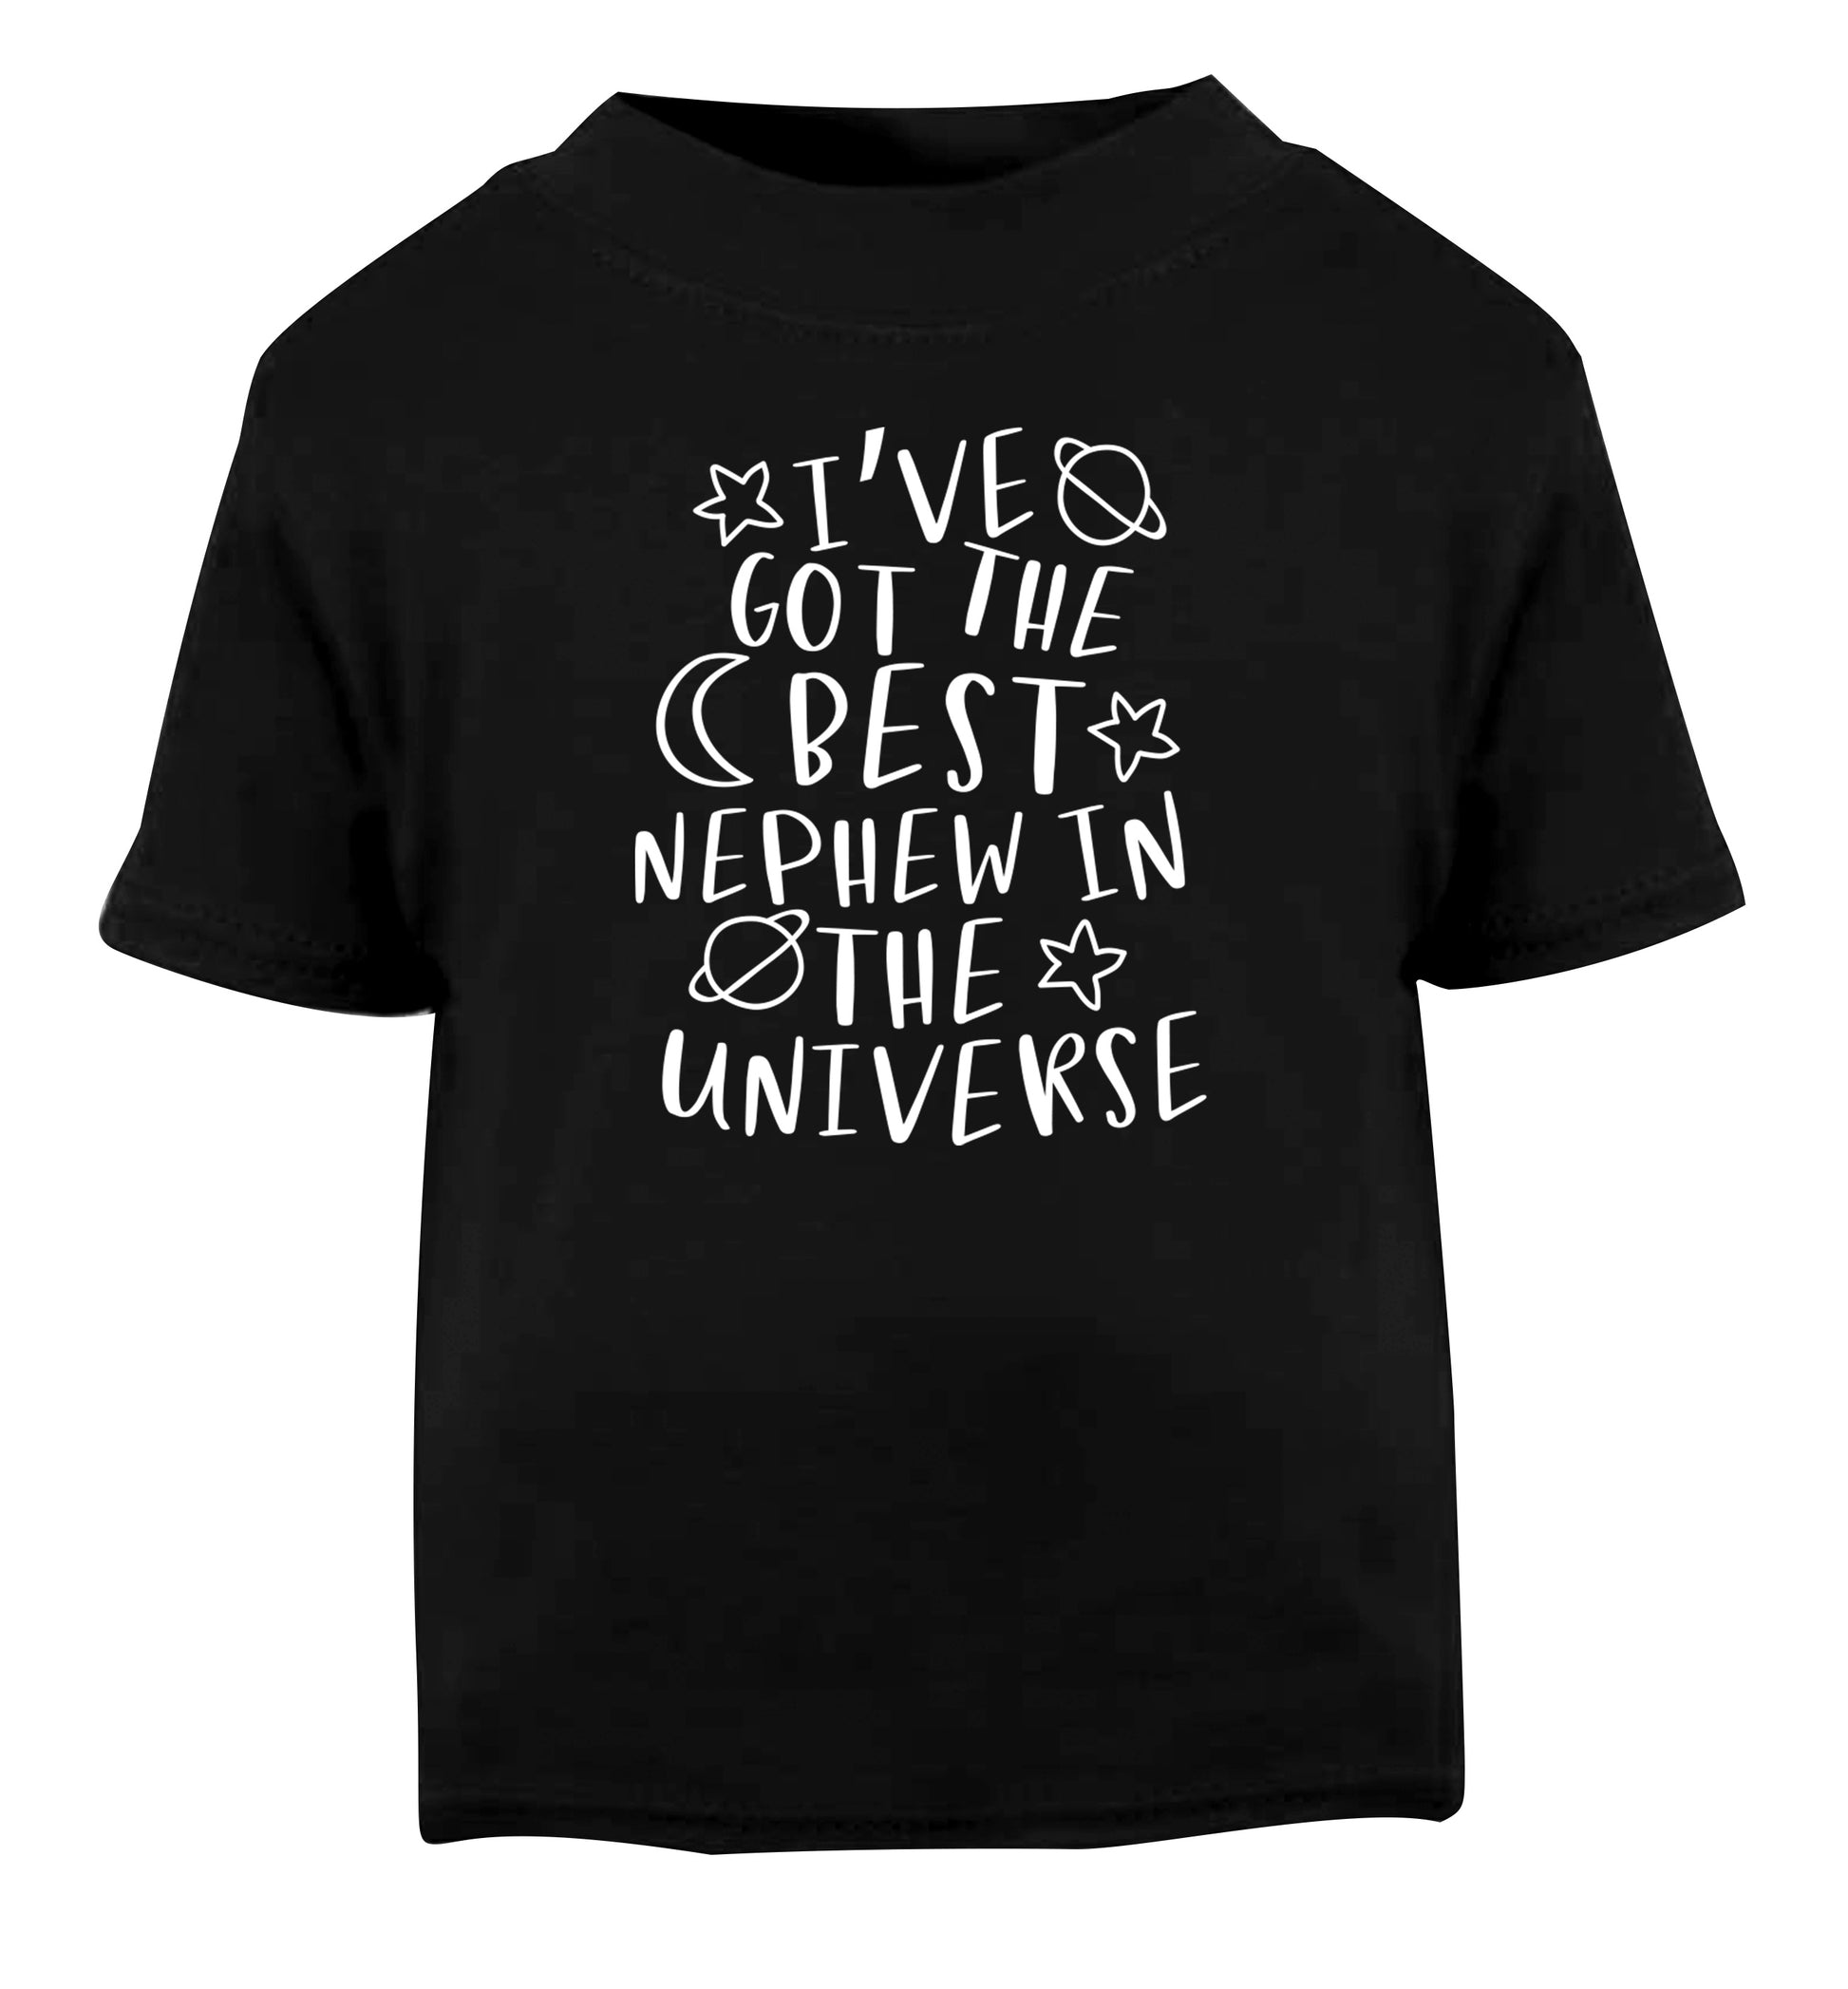 I've got the best nephew in the universe Black Baby Toddler Tshirt 2 years